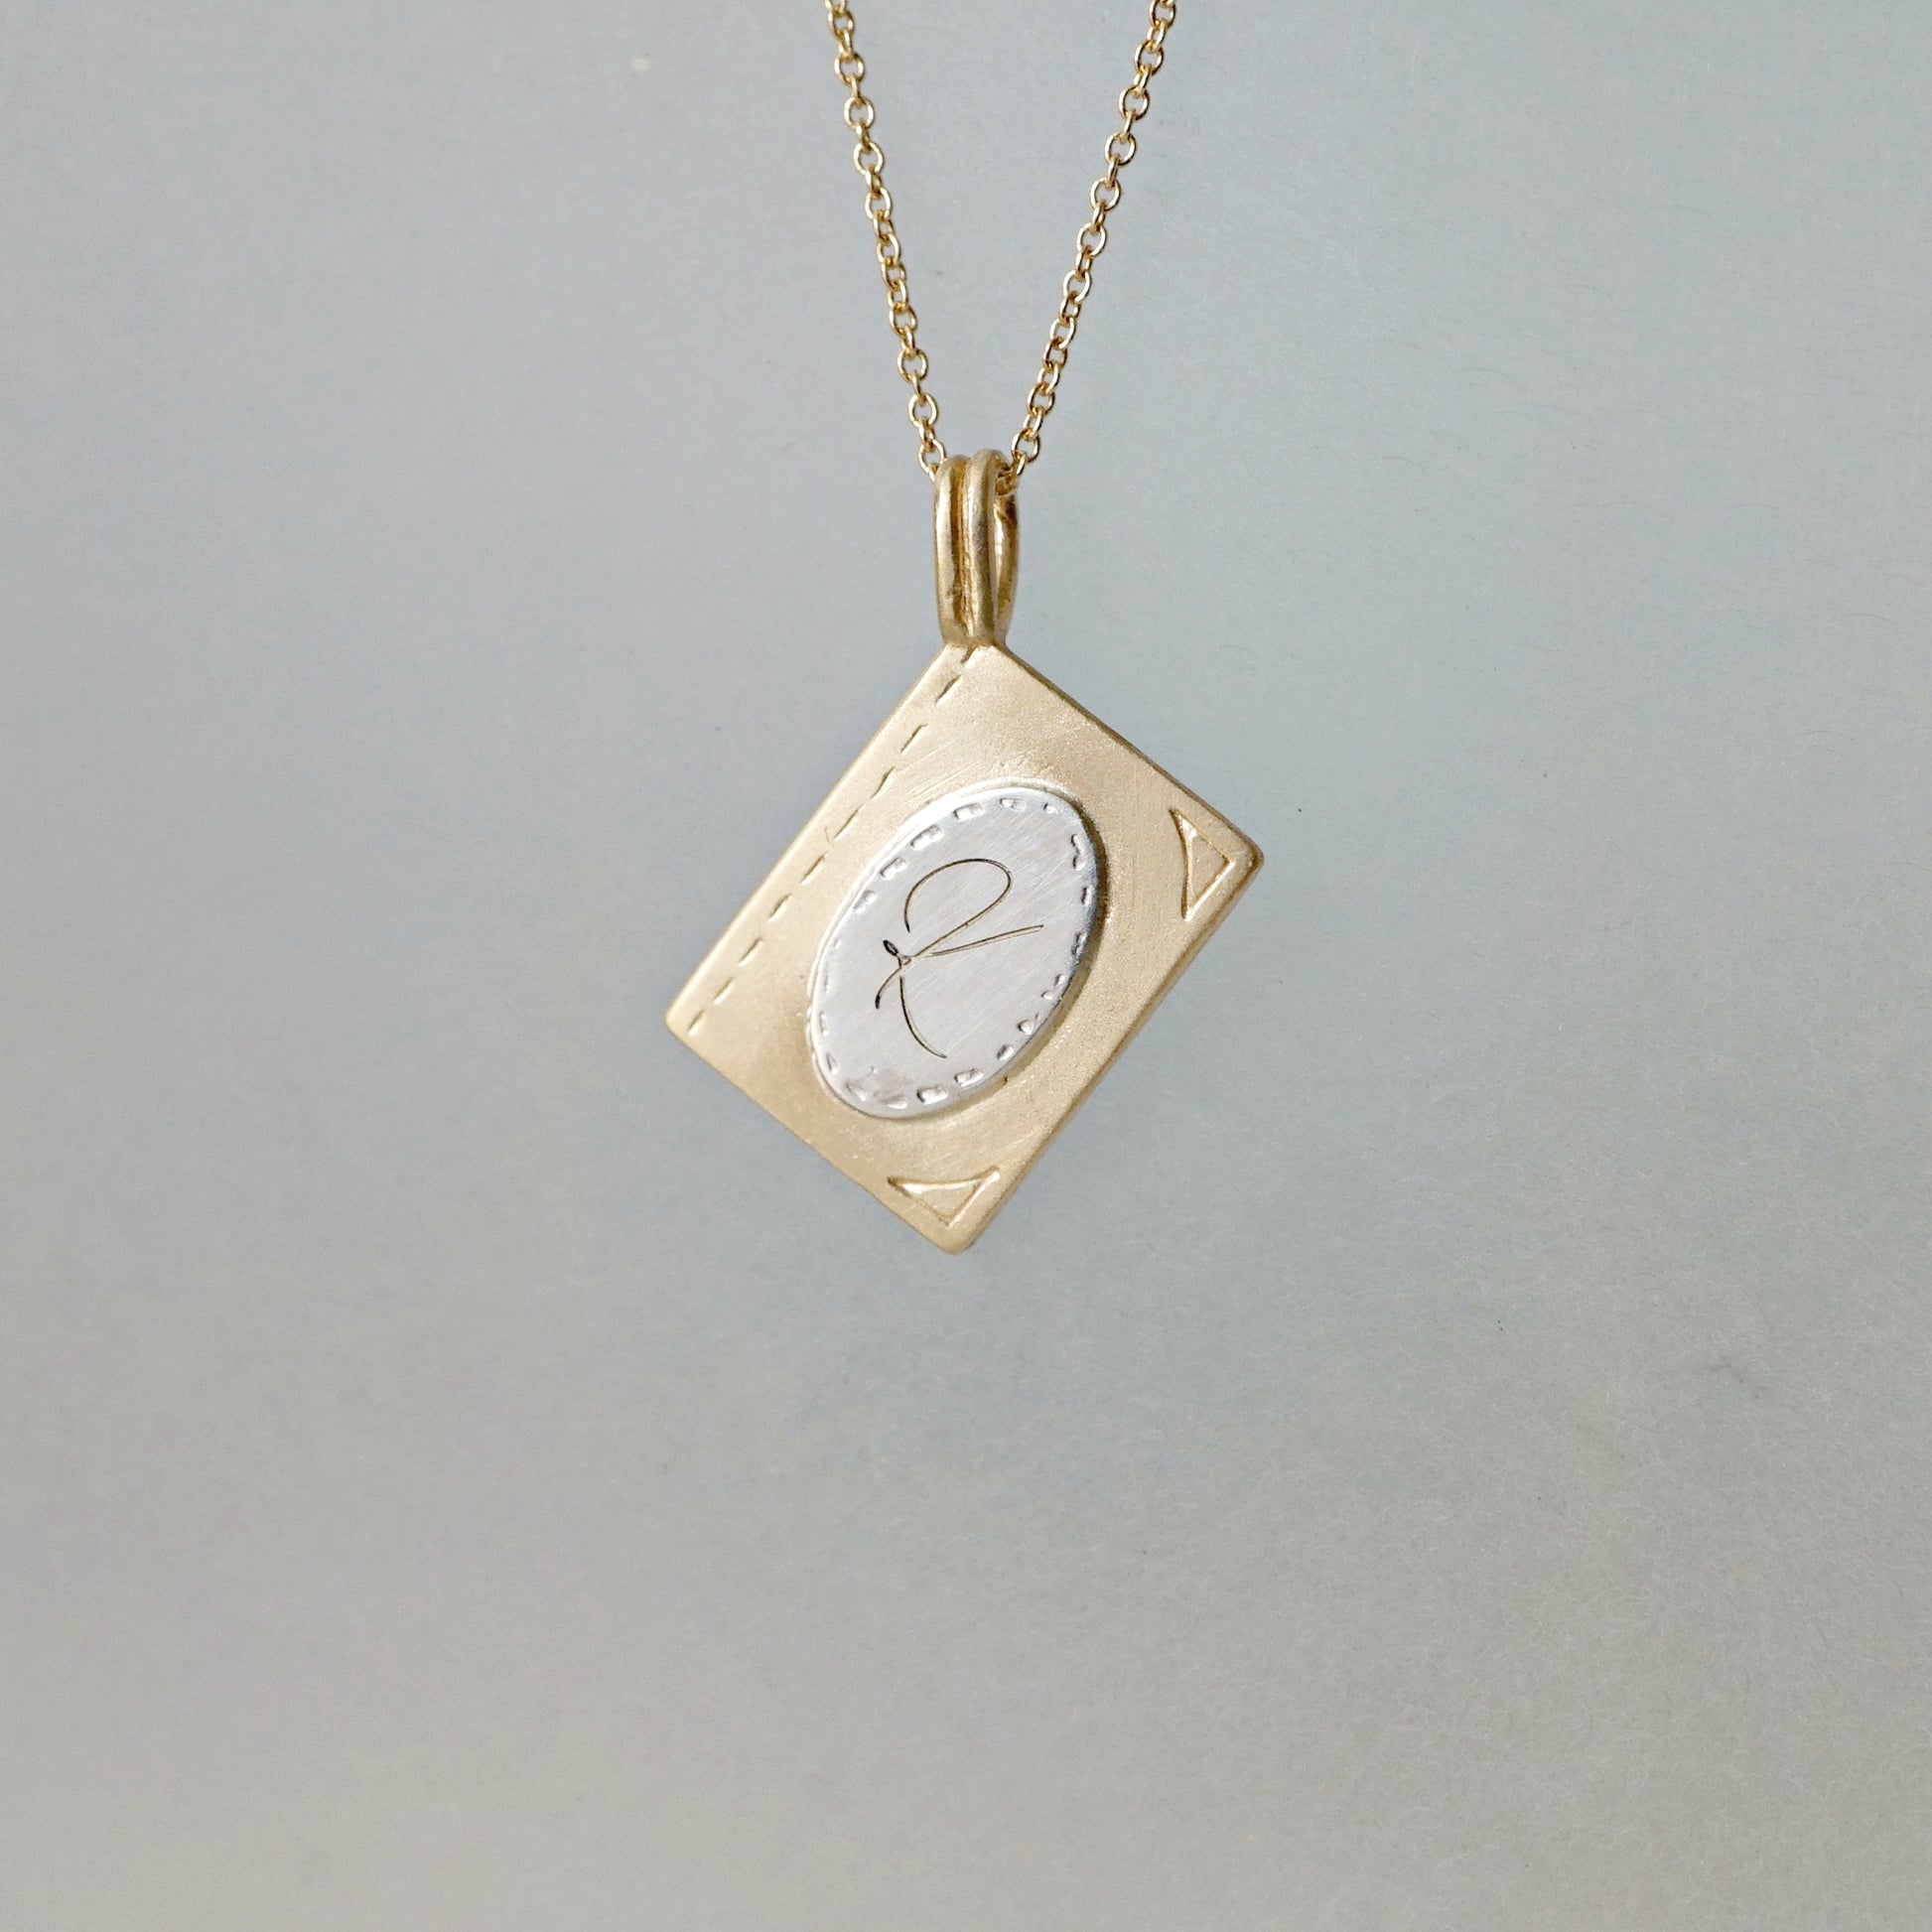 Initial book pendant necklace-14k gold